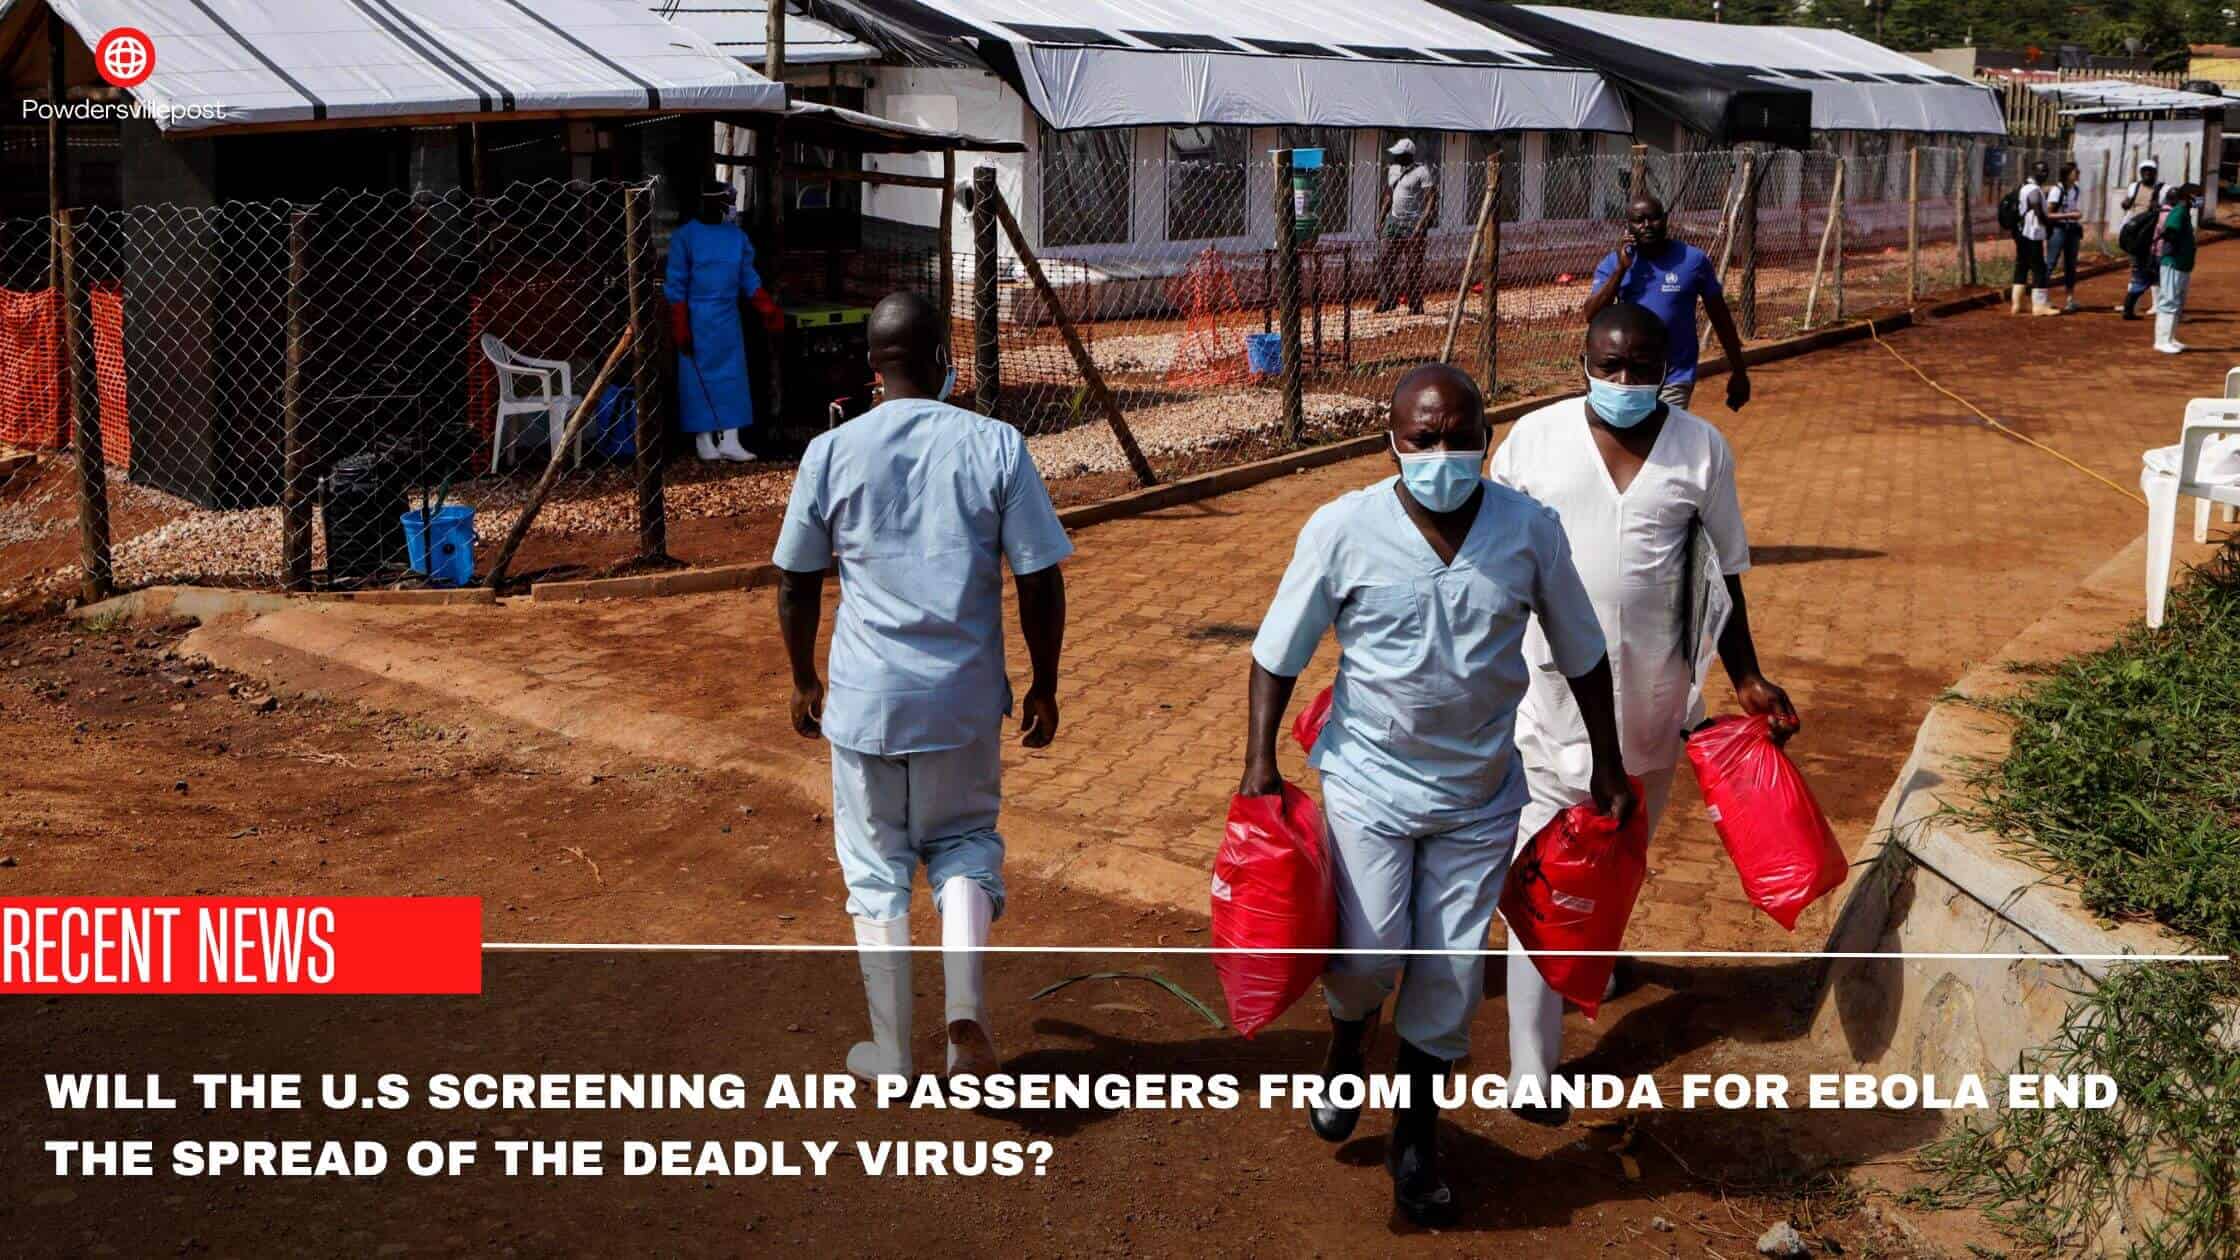 Will The U.S Screening Air Passengers From Uganda For Ebola End The Spread Of The Deadly Virus